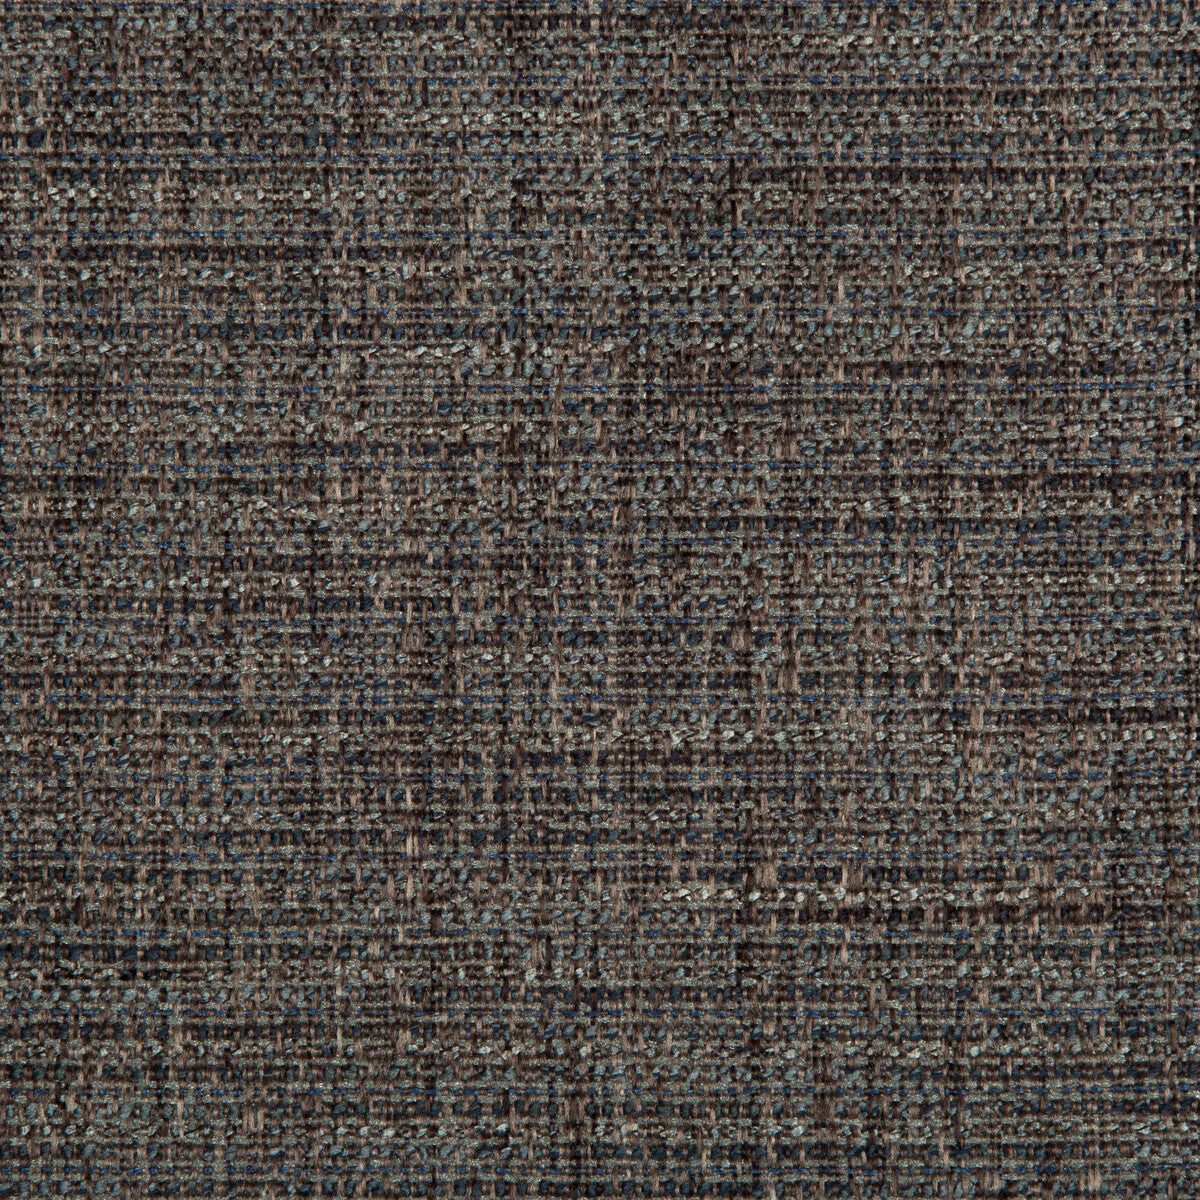 Kravet Smart fabric in 35396-521 color - pattern 35396.521.0 - by Kravet Smart in the Performance Crypton Home collection